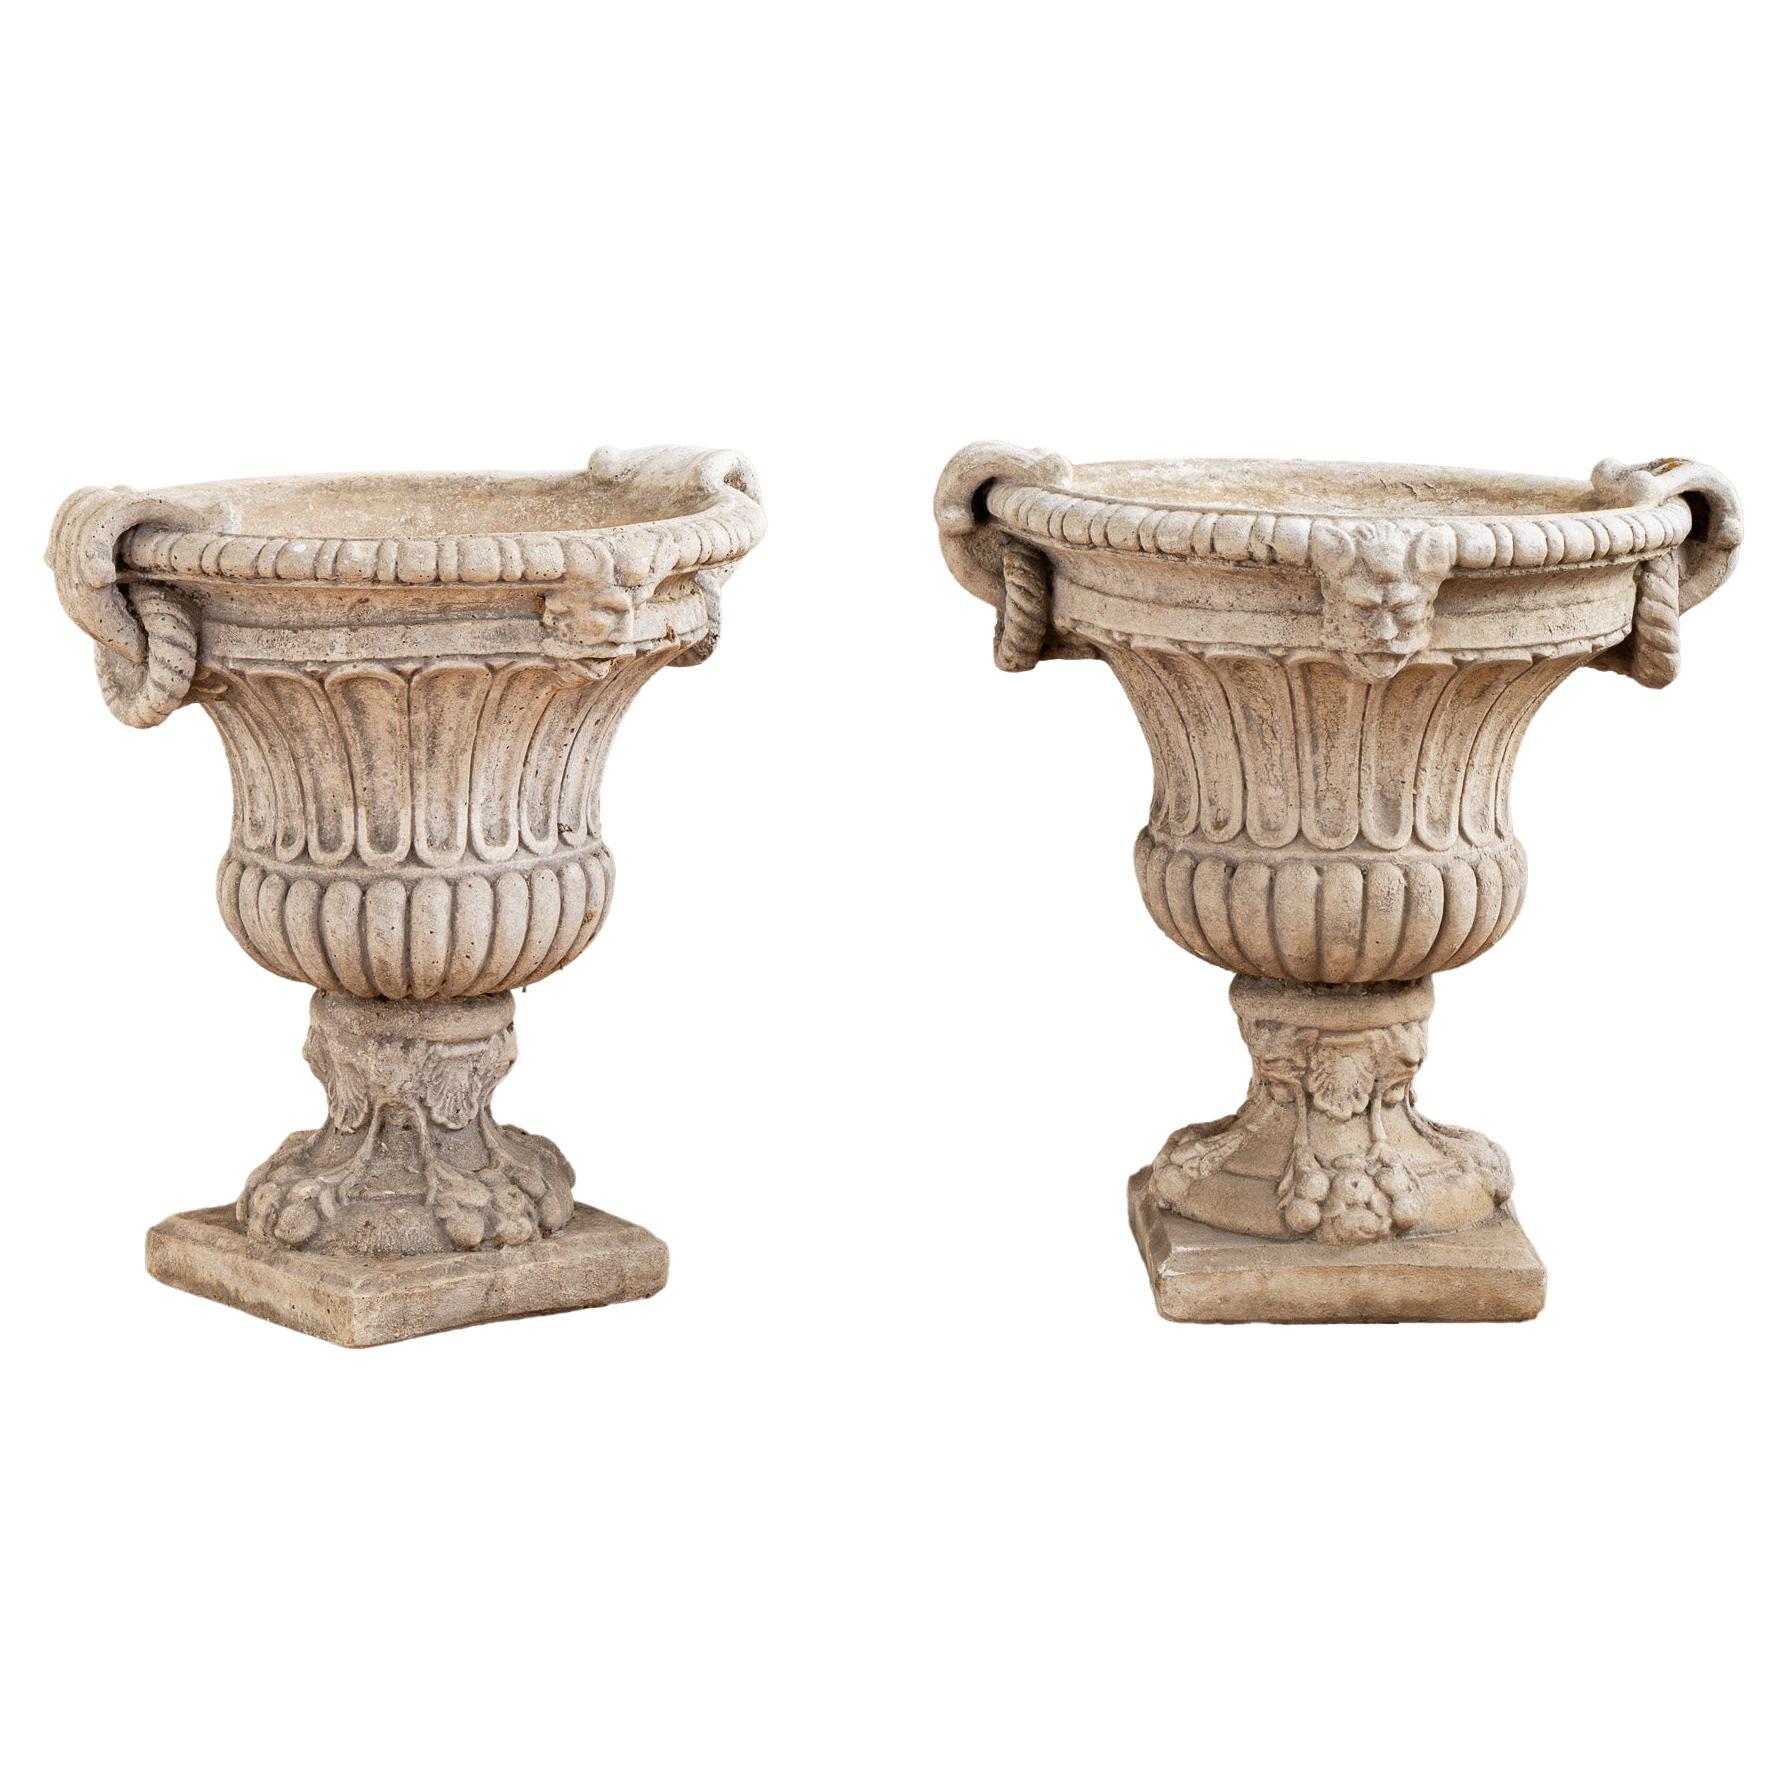 Circa mid 1900's, a matching set of four garden planter urns from Tuscany, Italy. The urns are made from reconstituted stone with lovely decorative detailing, including: fluted body work, egg and dart mouldings, stylised acanthus leaf handles with